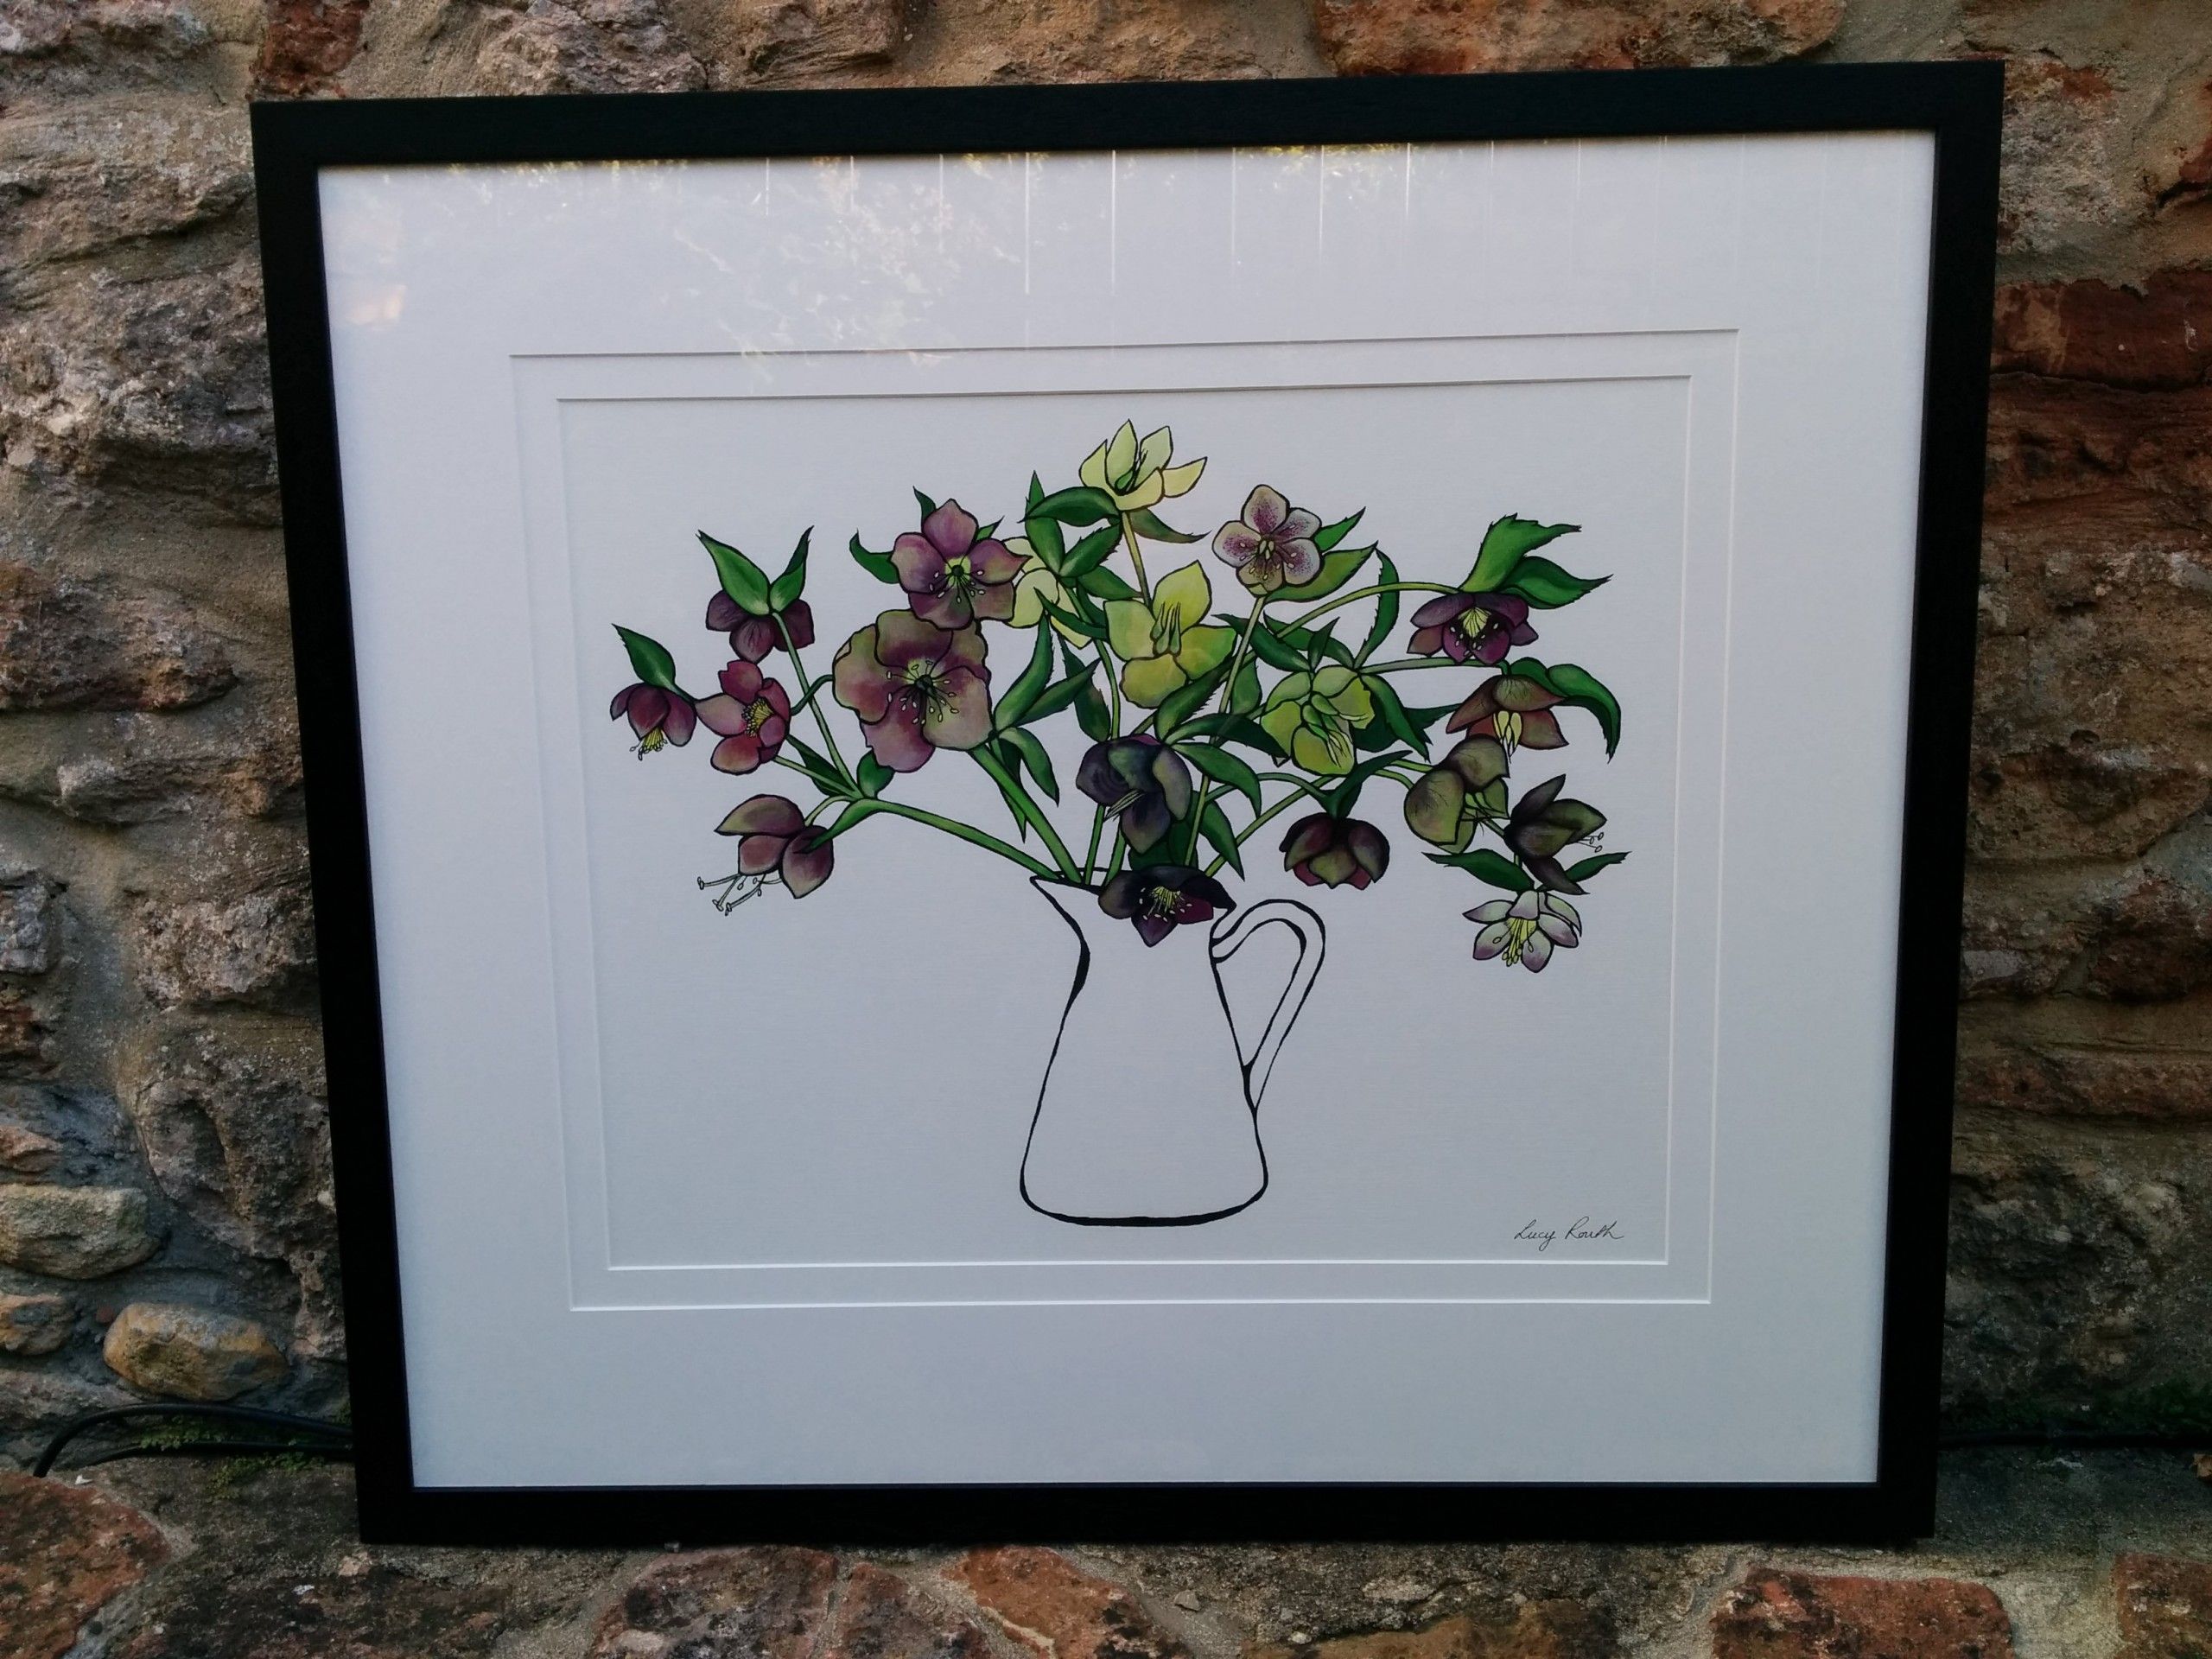 Jug of Hellebores by Lucy Routh